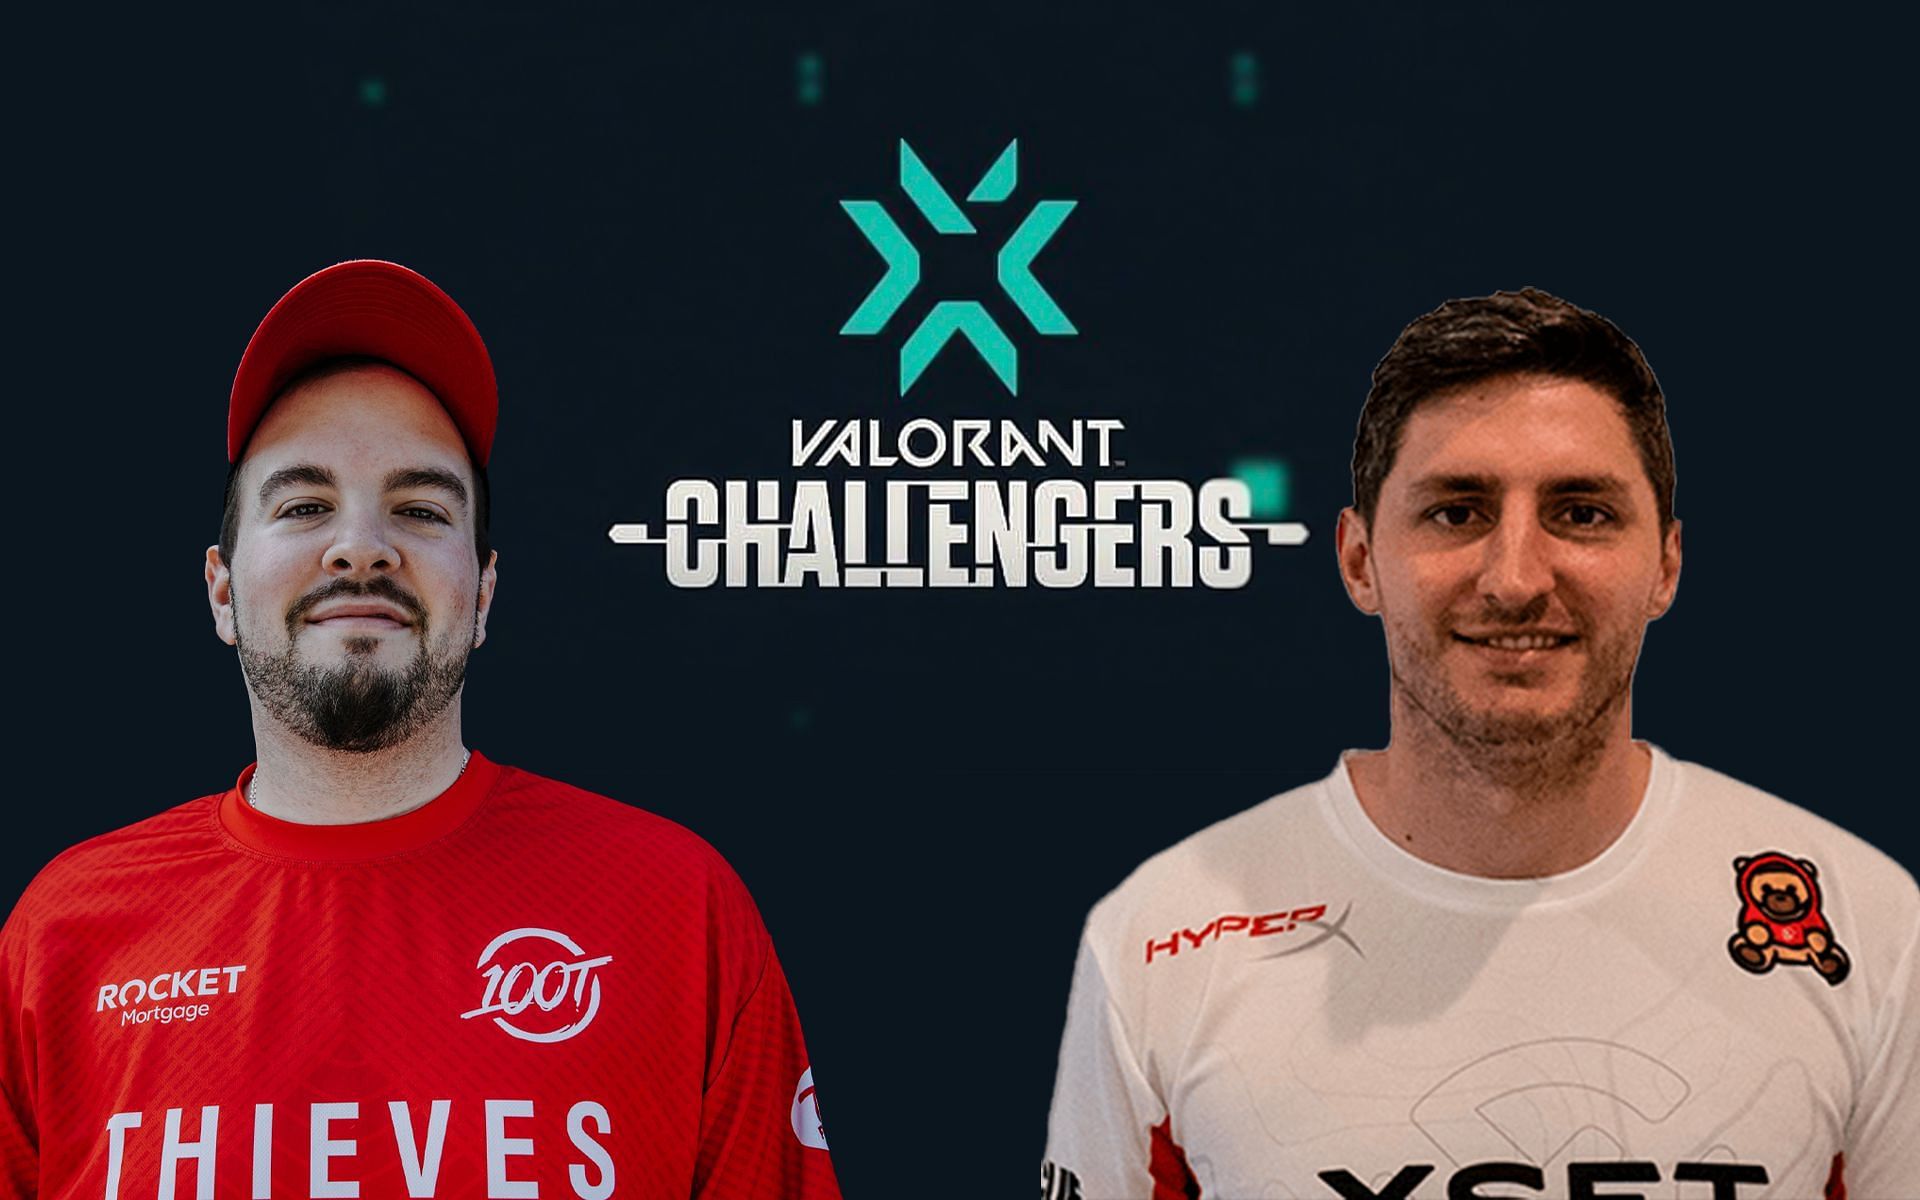 100 Thieves vs. XSET pre-match discussion in the Valorant Champions Tour Stage 1 NA Challengers (Image via Sportskeeda)